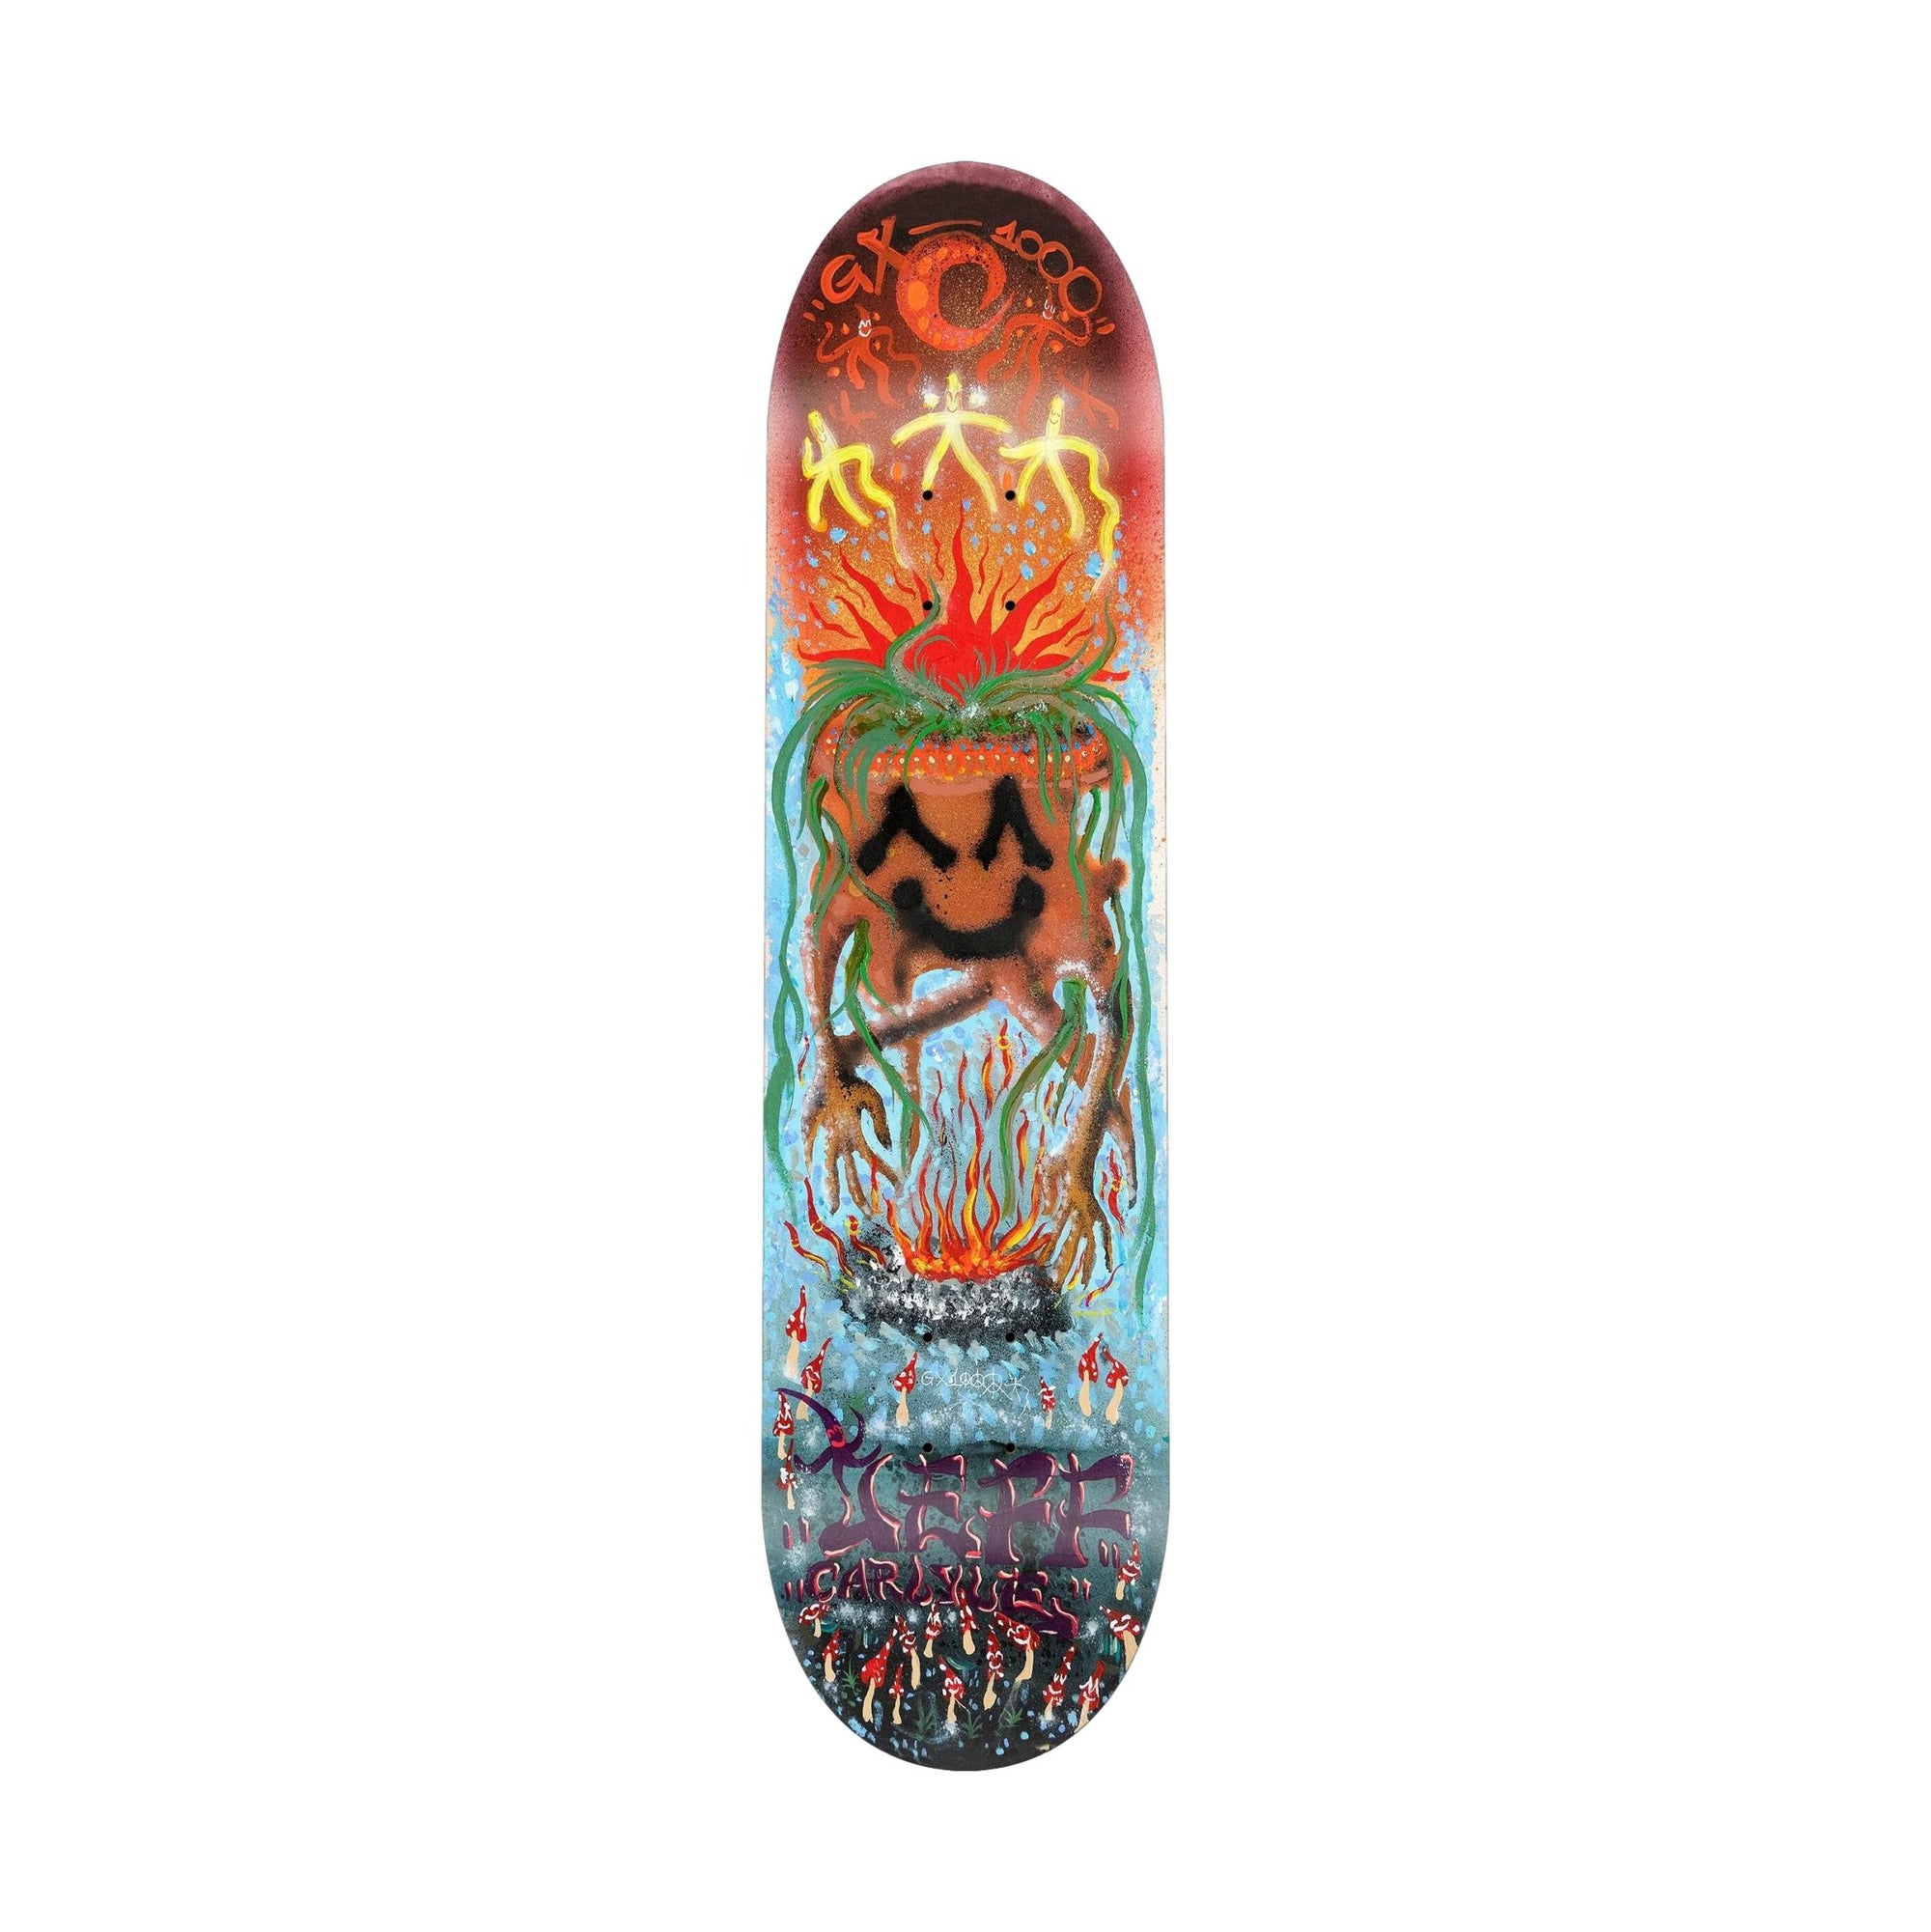 GX1000 Bring Me To Life Carlyle 8.125" Deck - Venue Skateboards